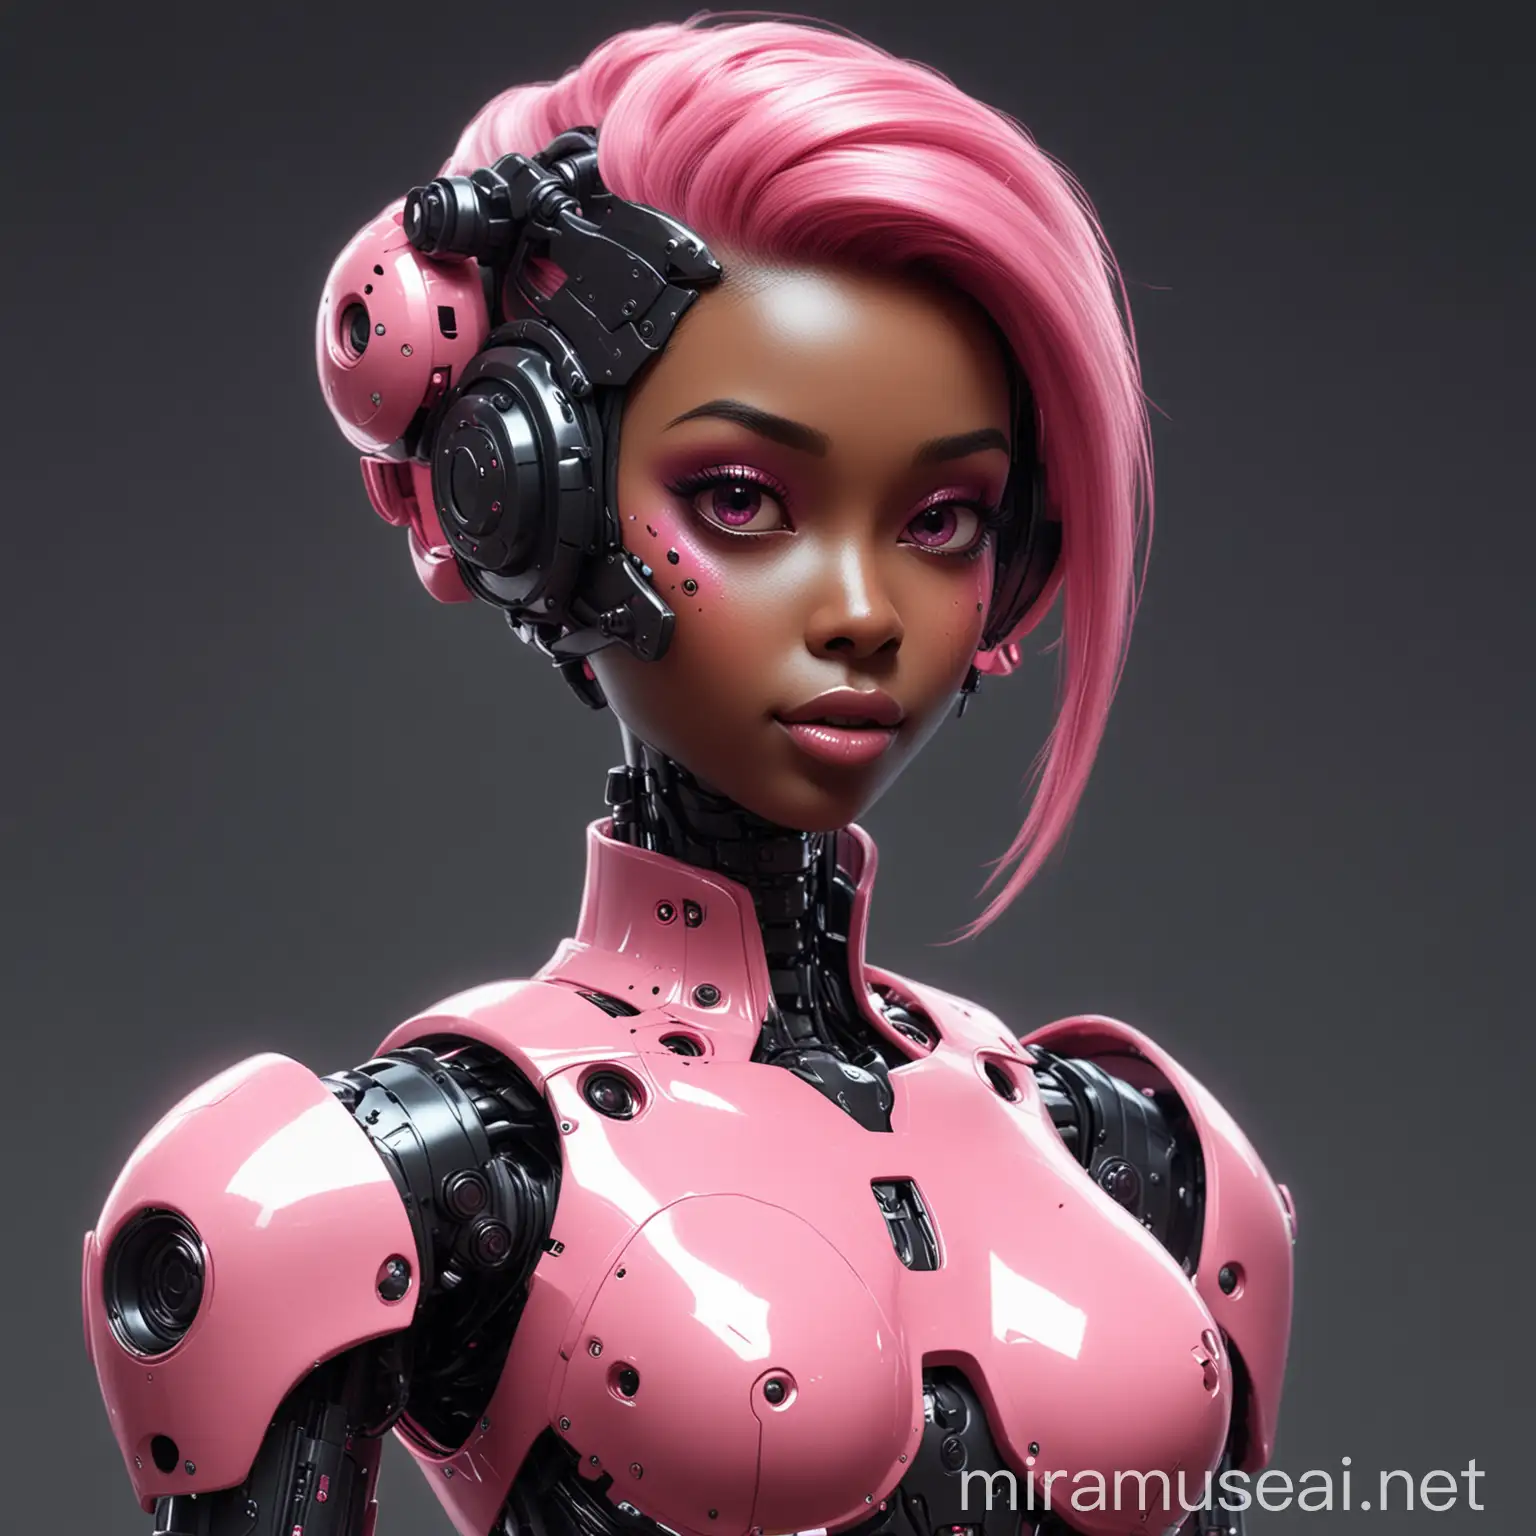 sexy black robot lady with pink armor in the style of pixar
